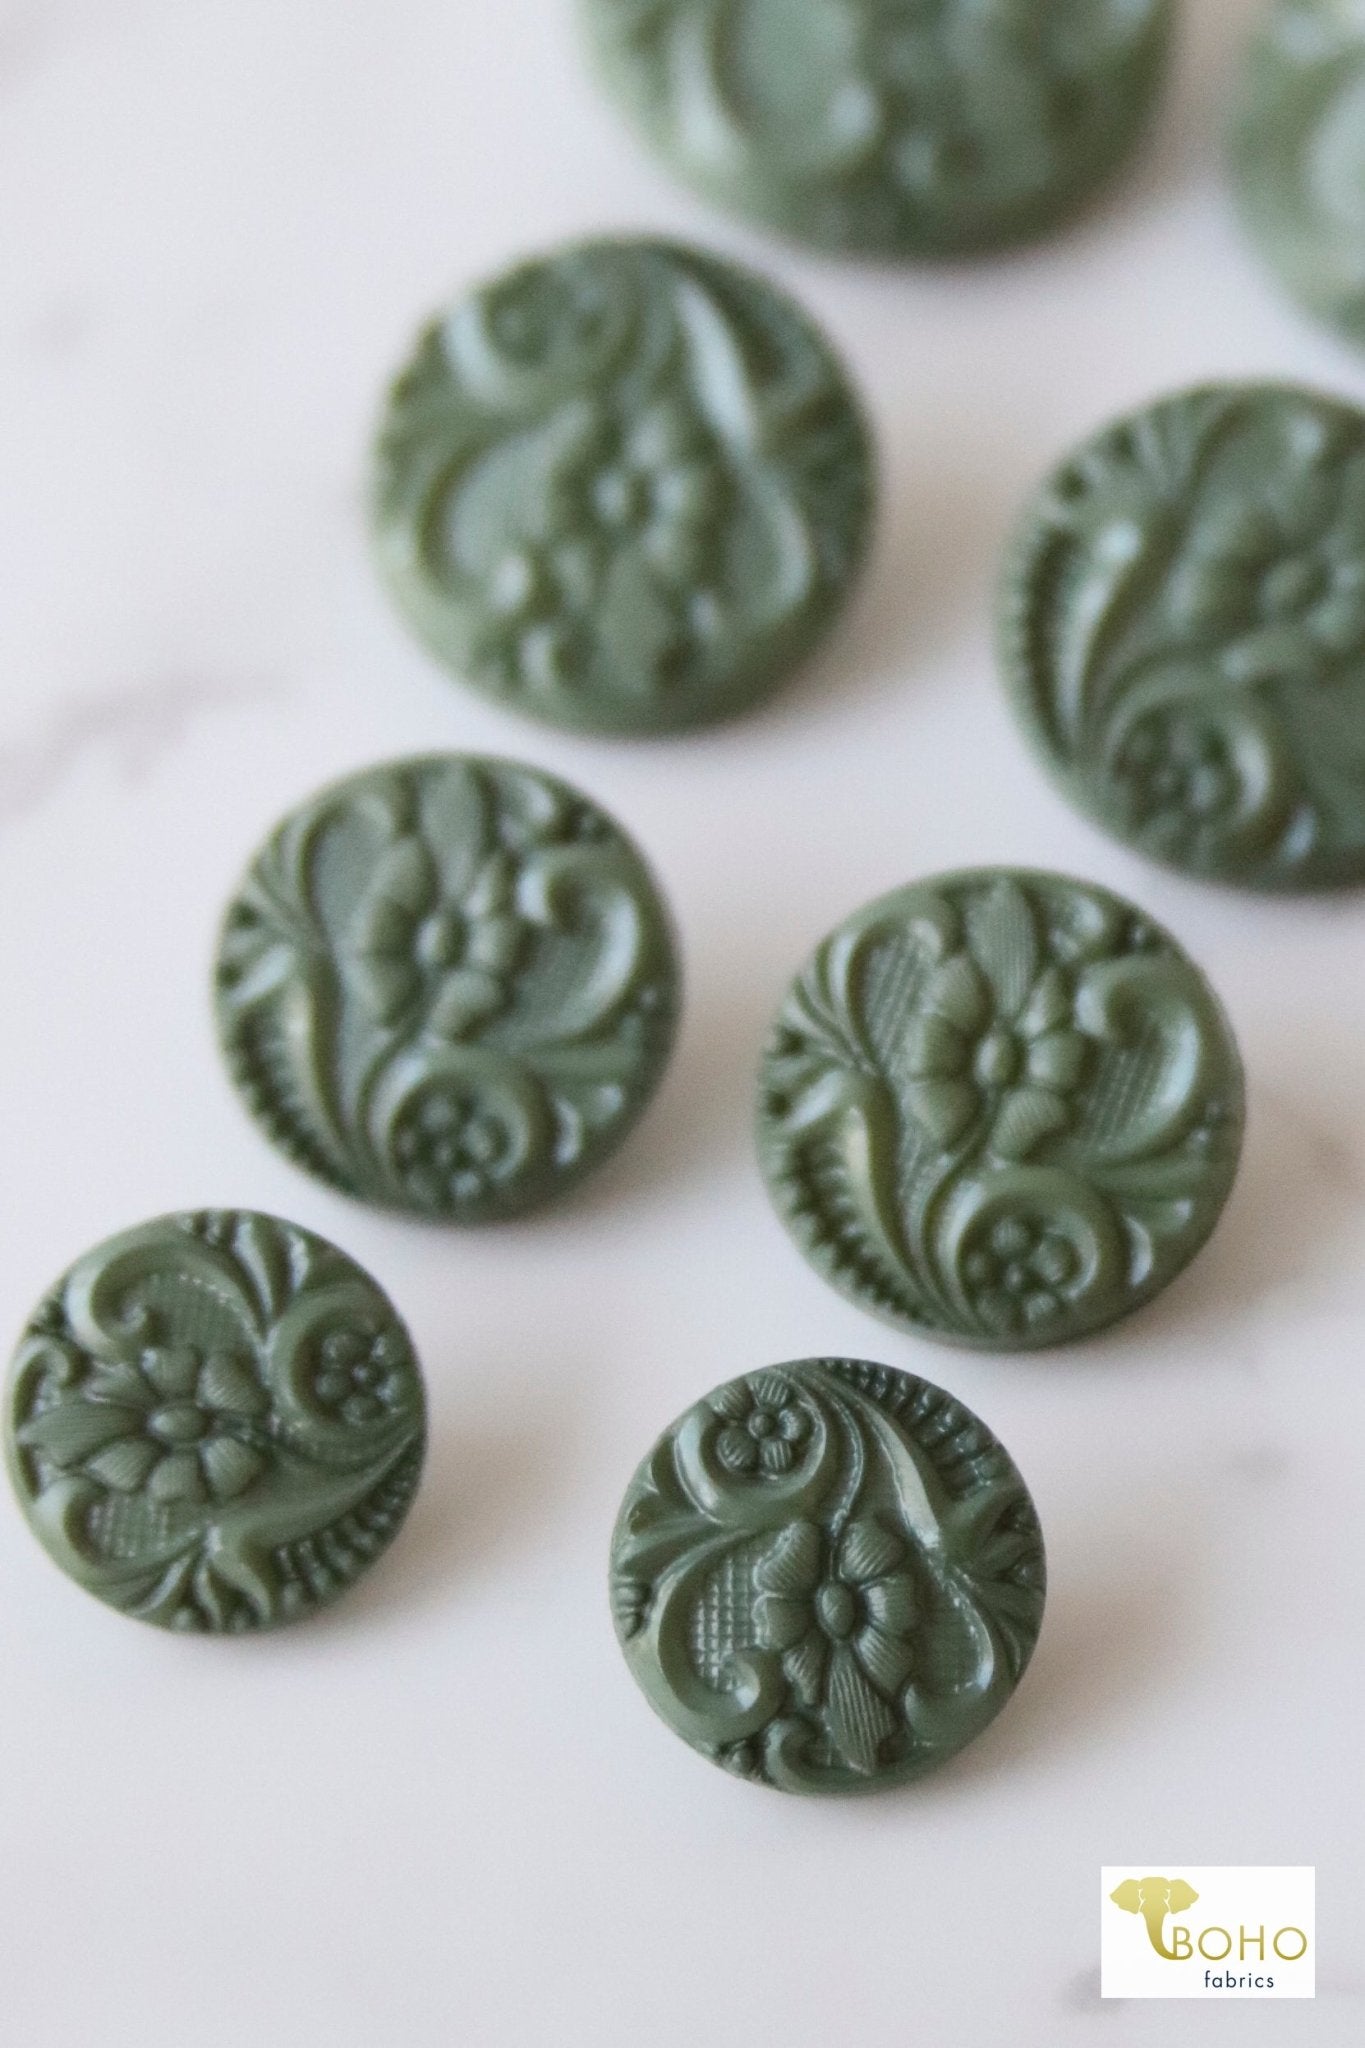 Sage Green, Art Nouveau Florals, Shank Buttons. Available in 15mm, 18mm, 20mm, 25.5mm - Boho Fabrics